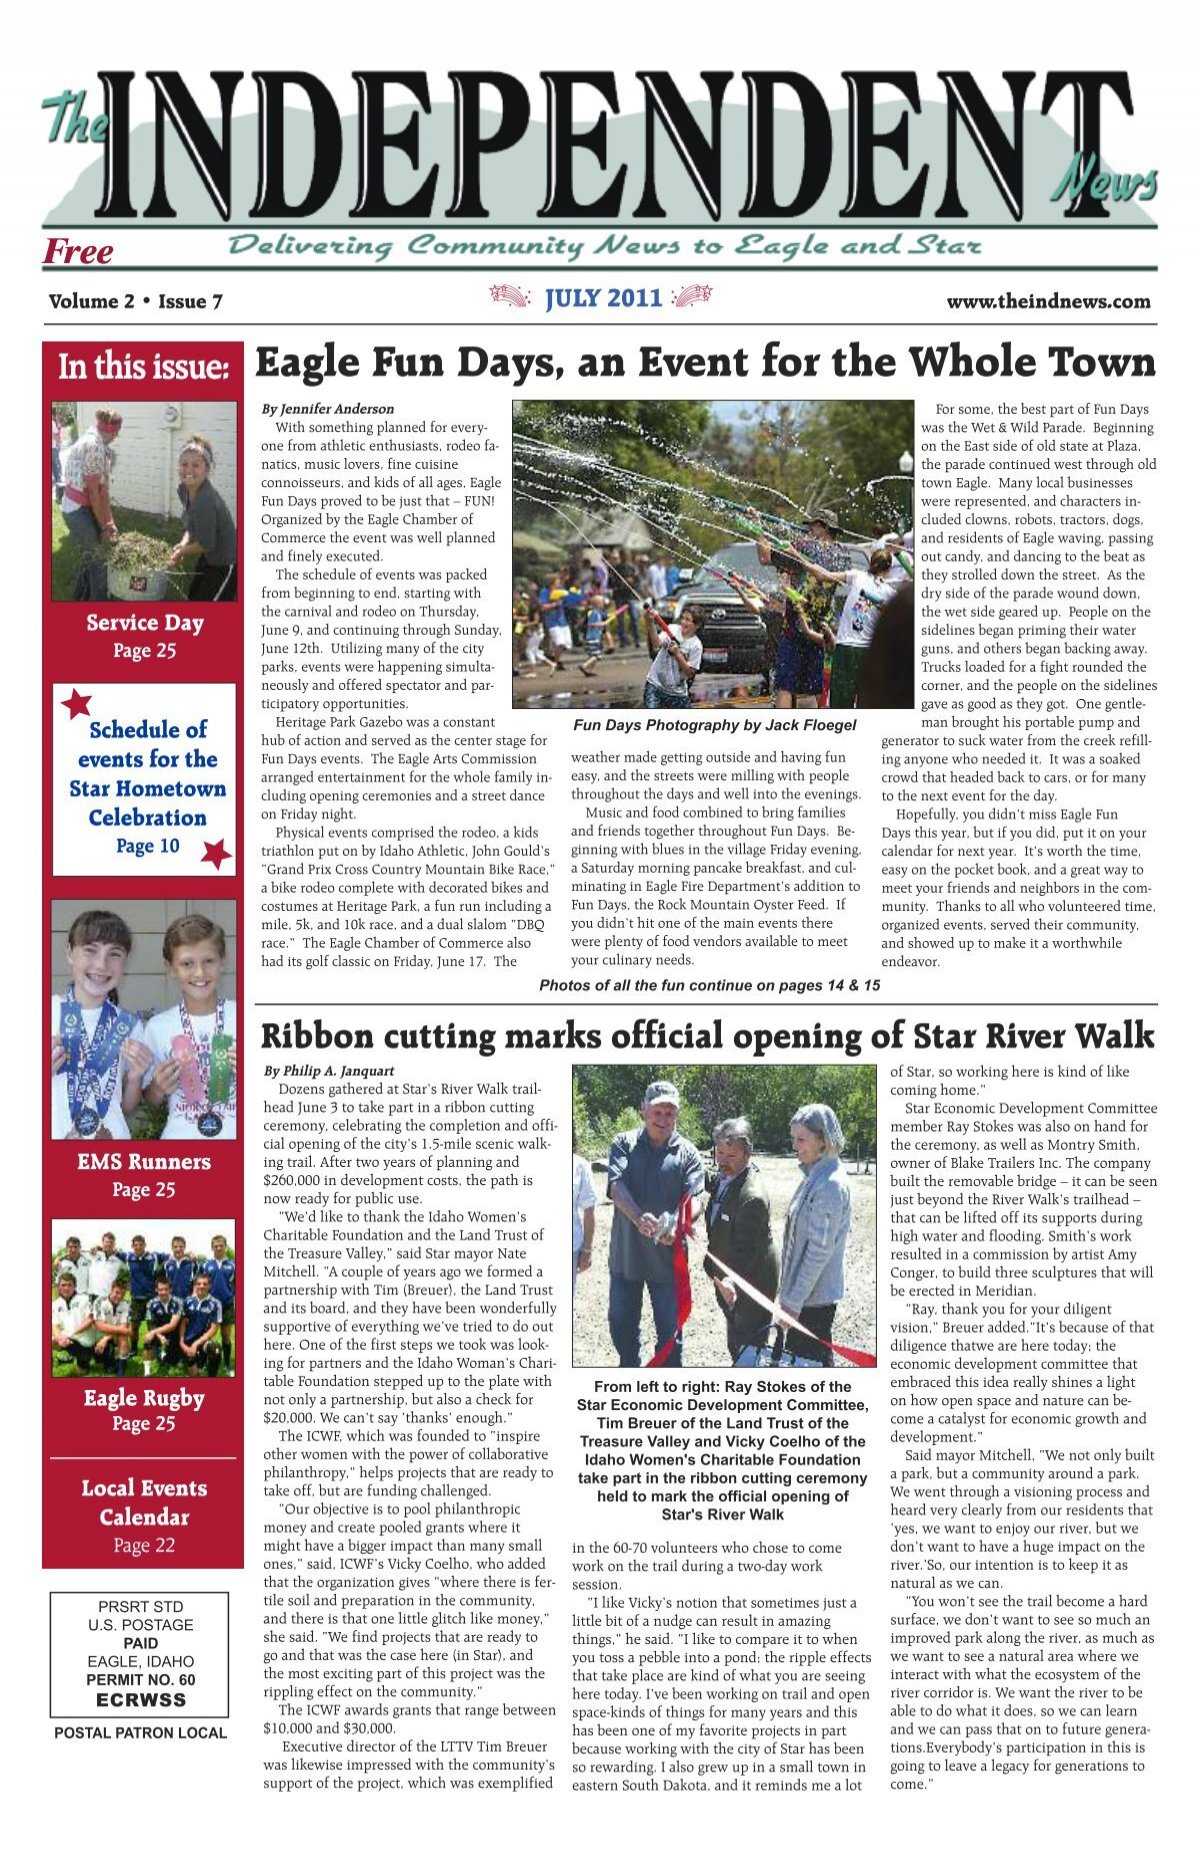 Eagle Fun Days, an Event for the Whole Town - Independent News